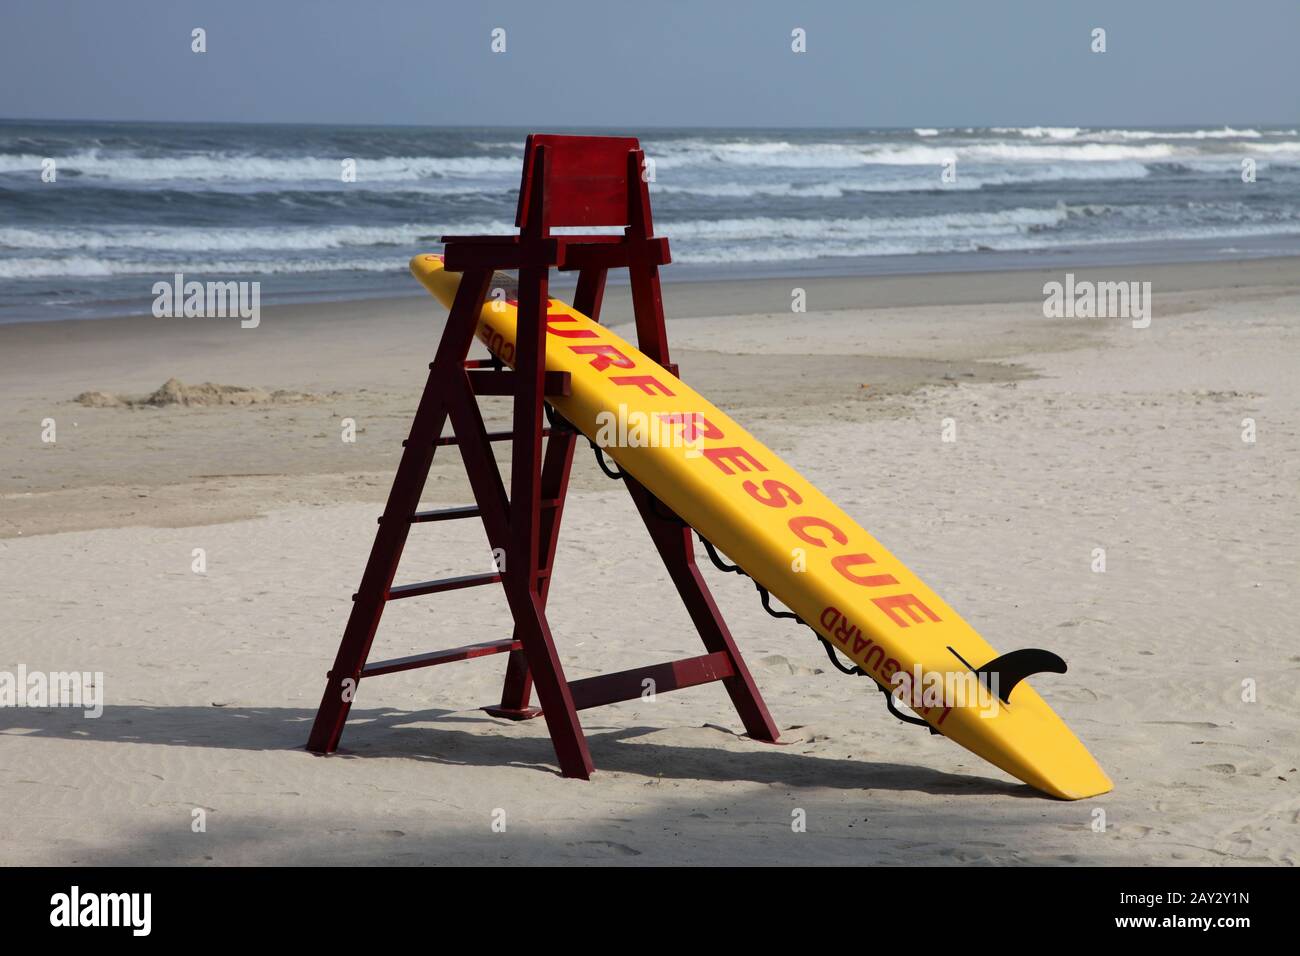 Surf Rescue from rescuer on a beach with nobody around Stock Photo